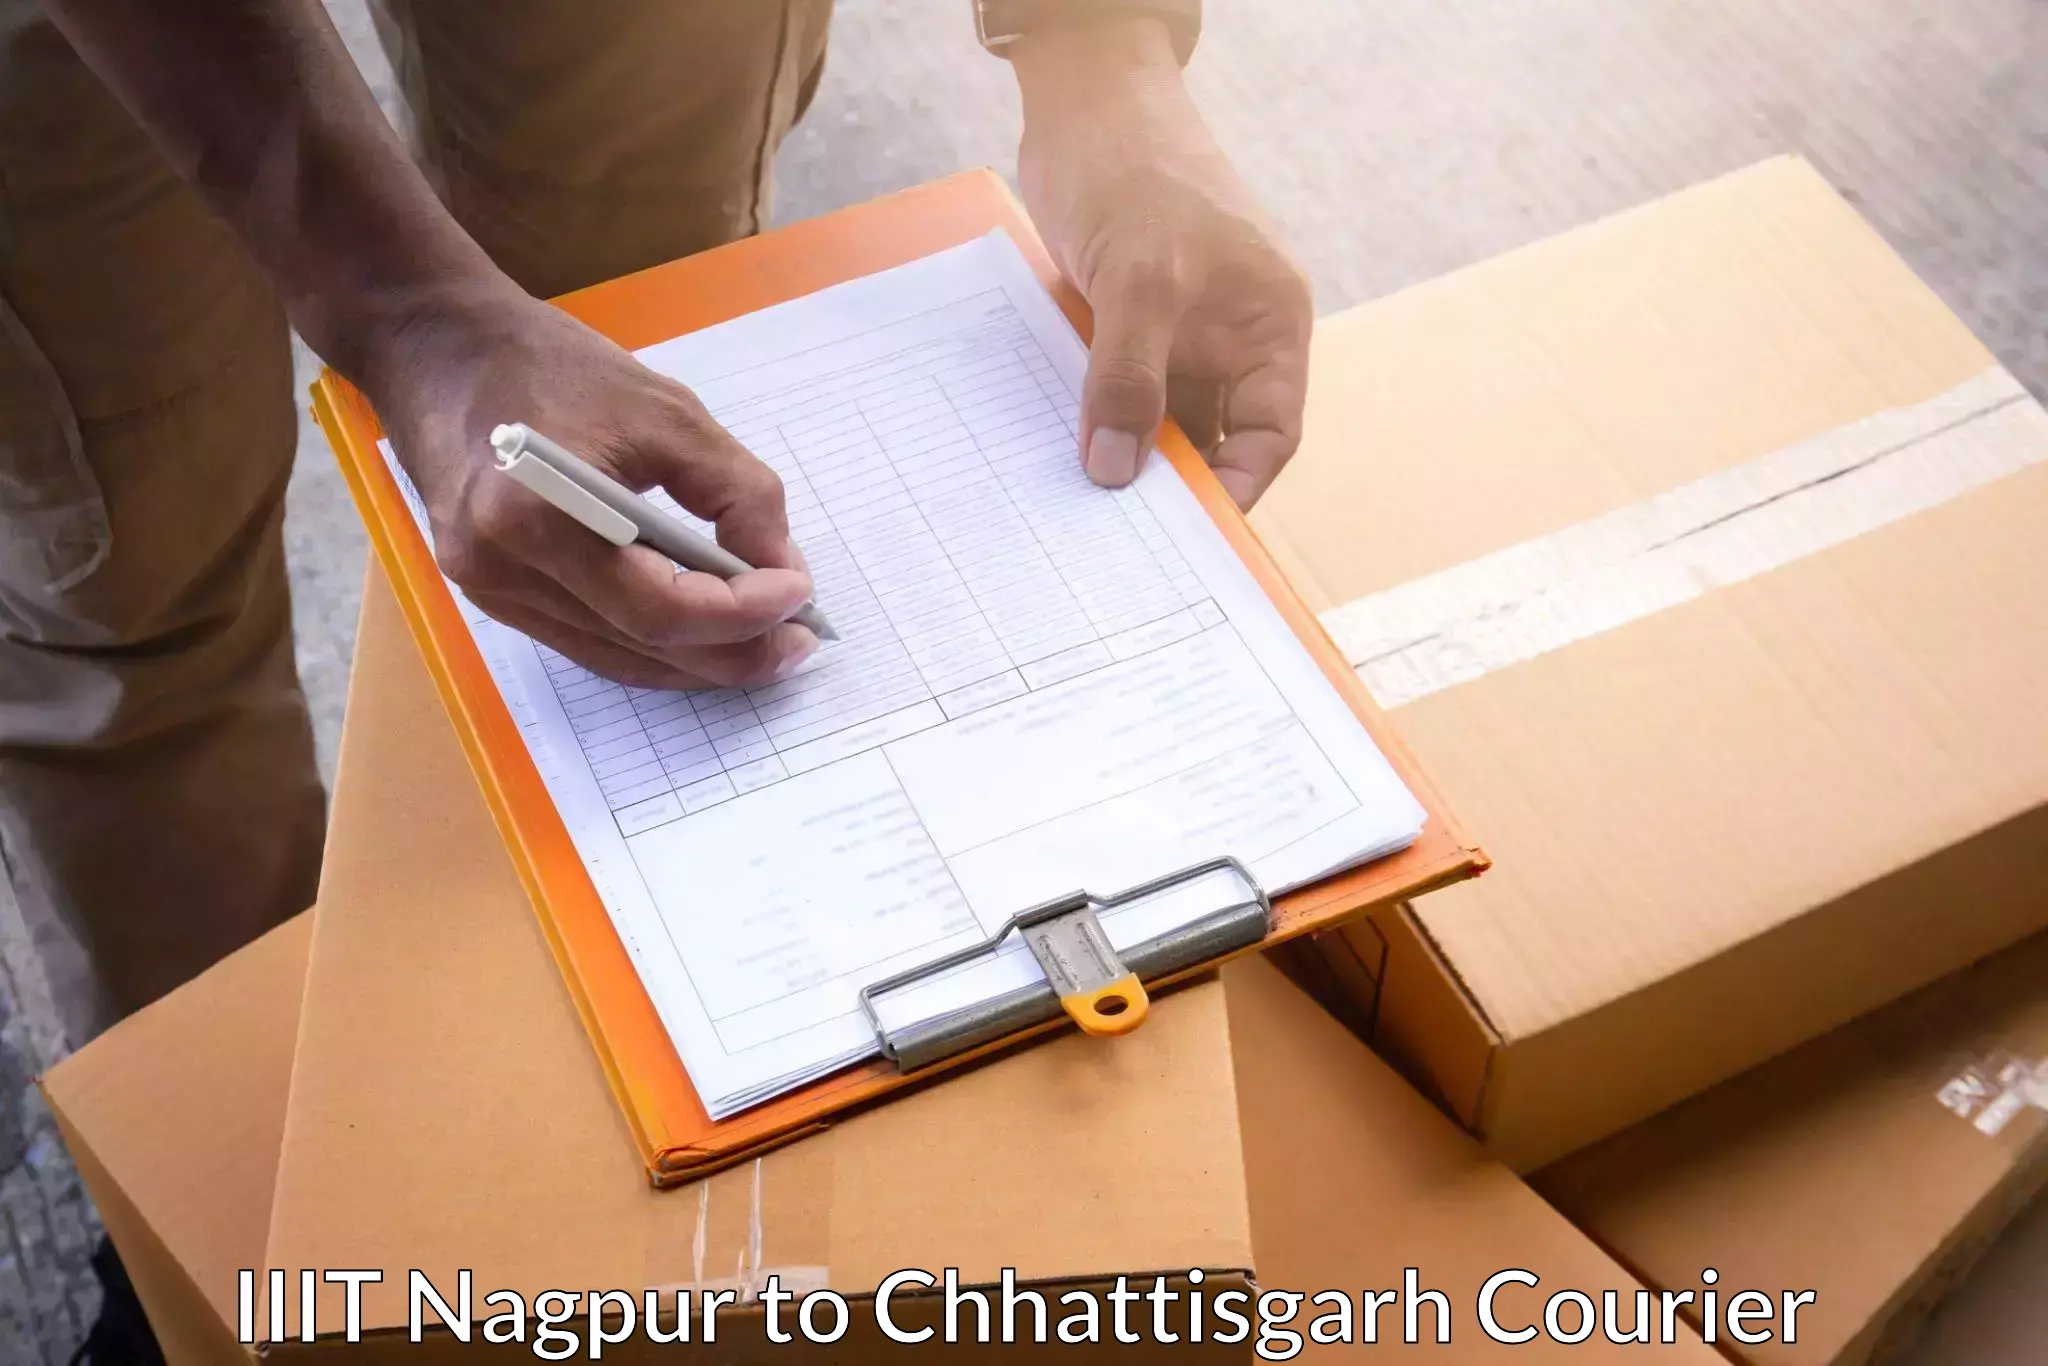 Courier service booking IIIT Nagpur to Sukma